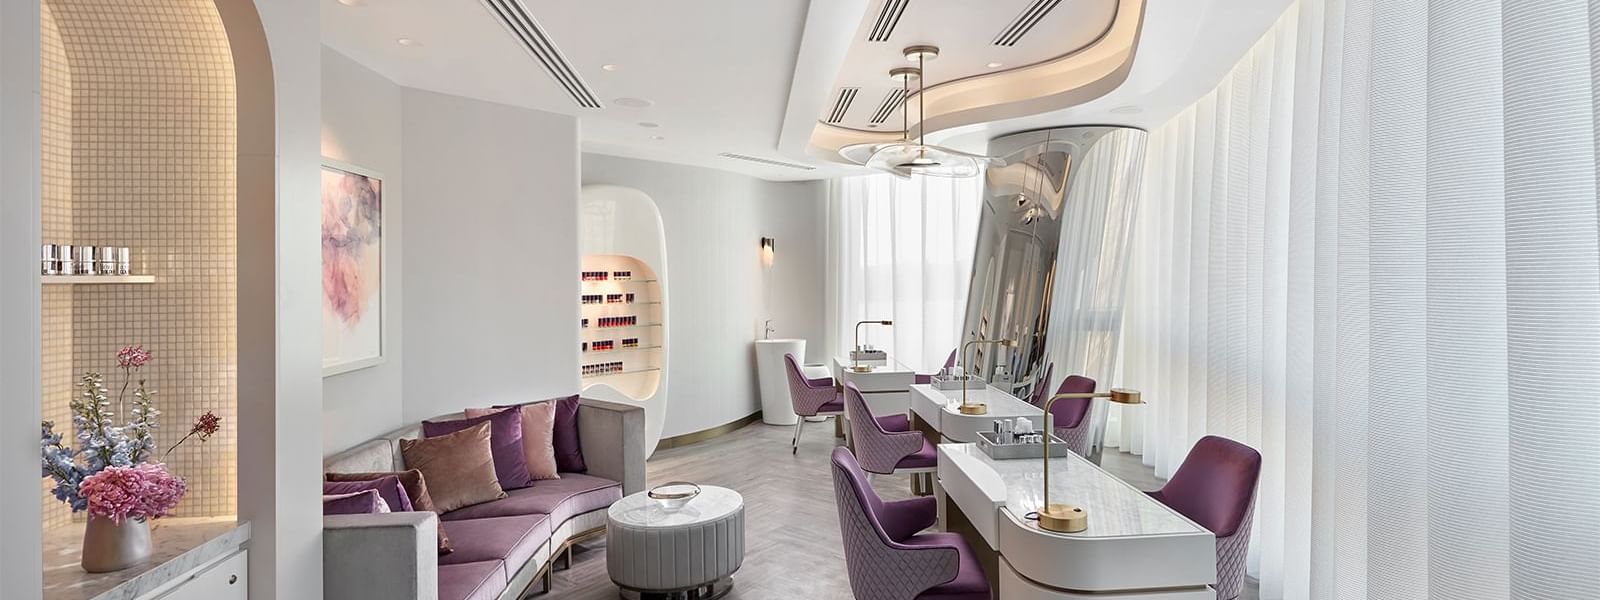 Manicures & Pedicures chairs in Spa at Crown Towers Sydney